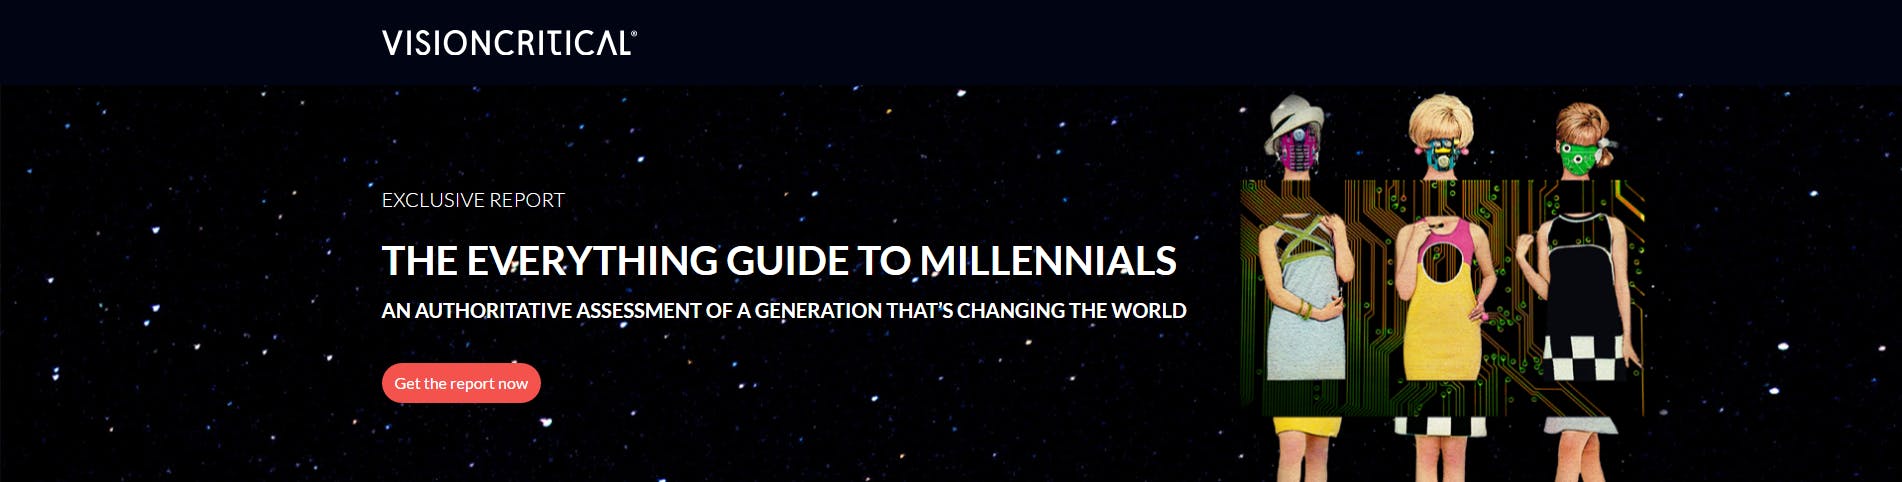 The Everything Guide to Millennials media 1